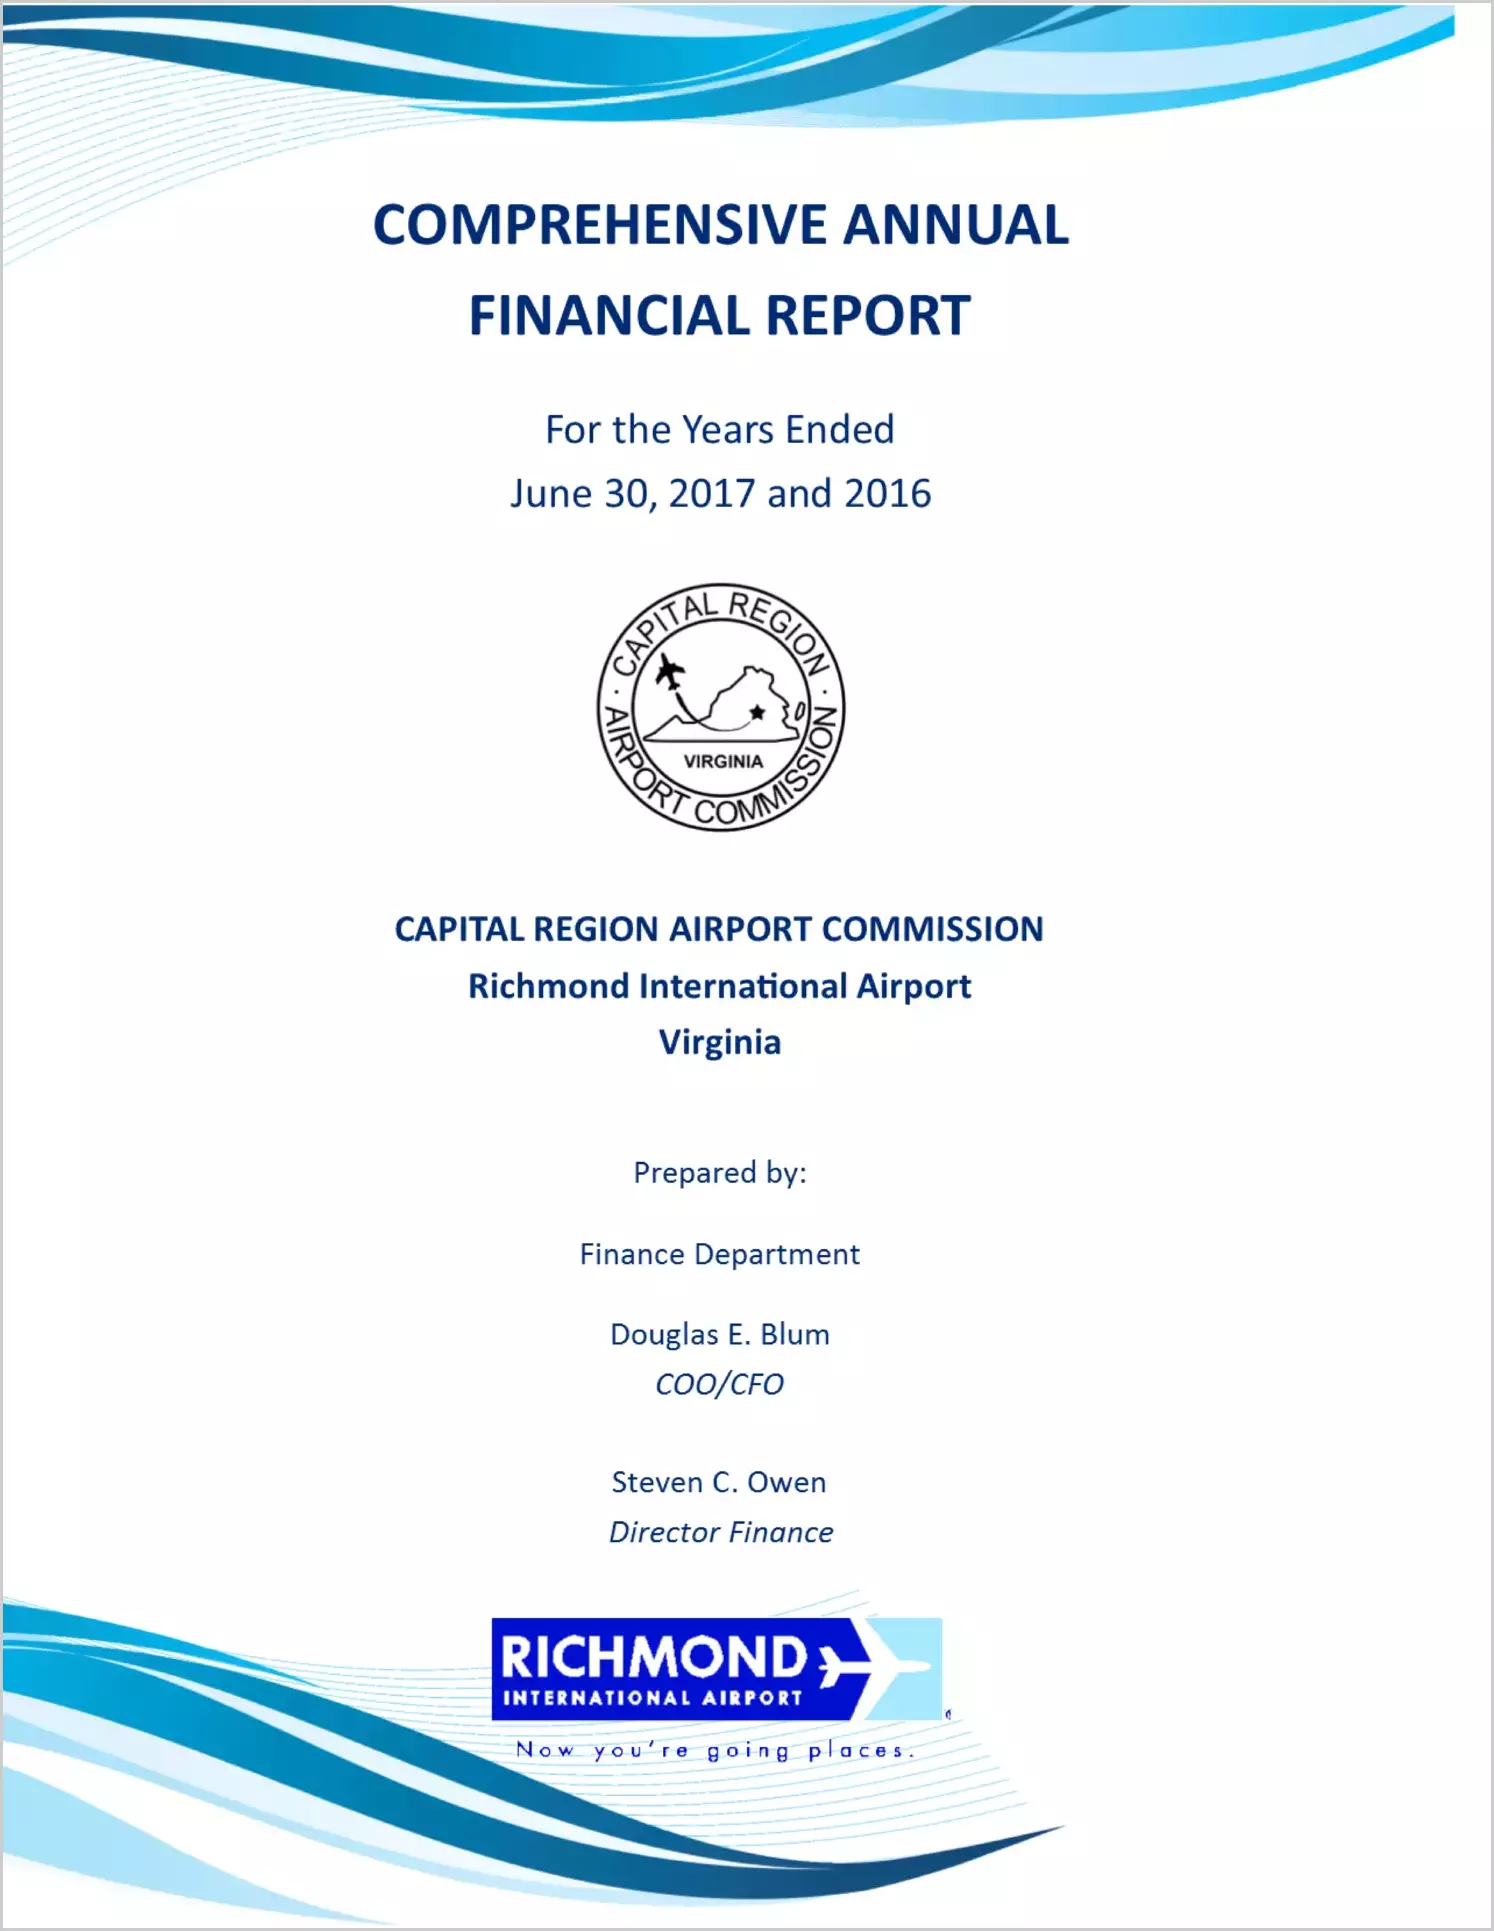 2017 ABC/Other Annual Financial Report  for Capital Region Airport Commission